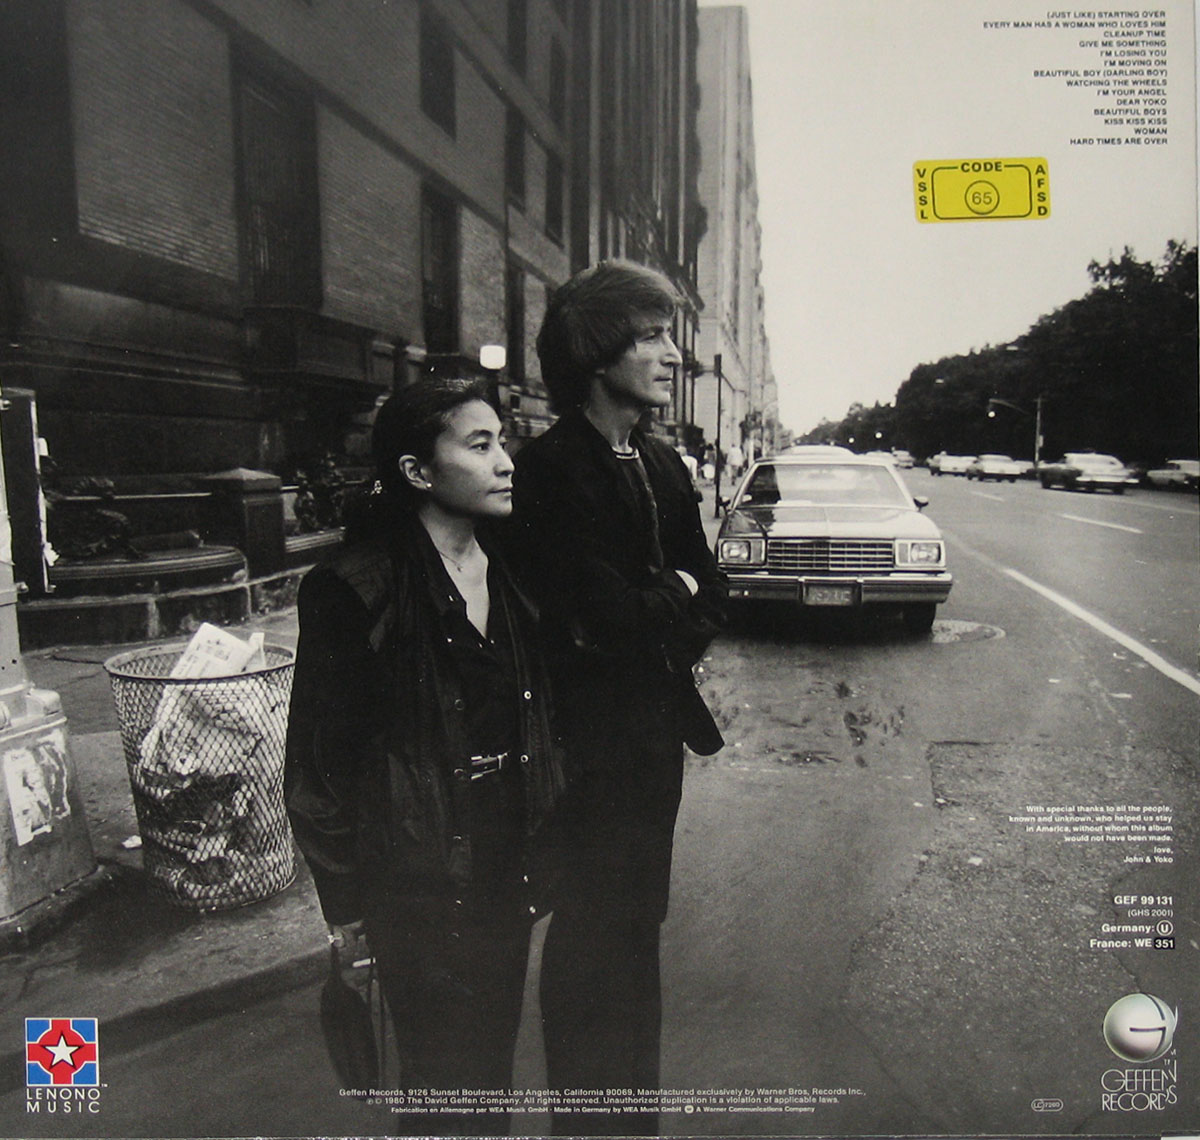 Photo of Yoko Ono and John Lennon standing in front of a trashcan and on the street